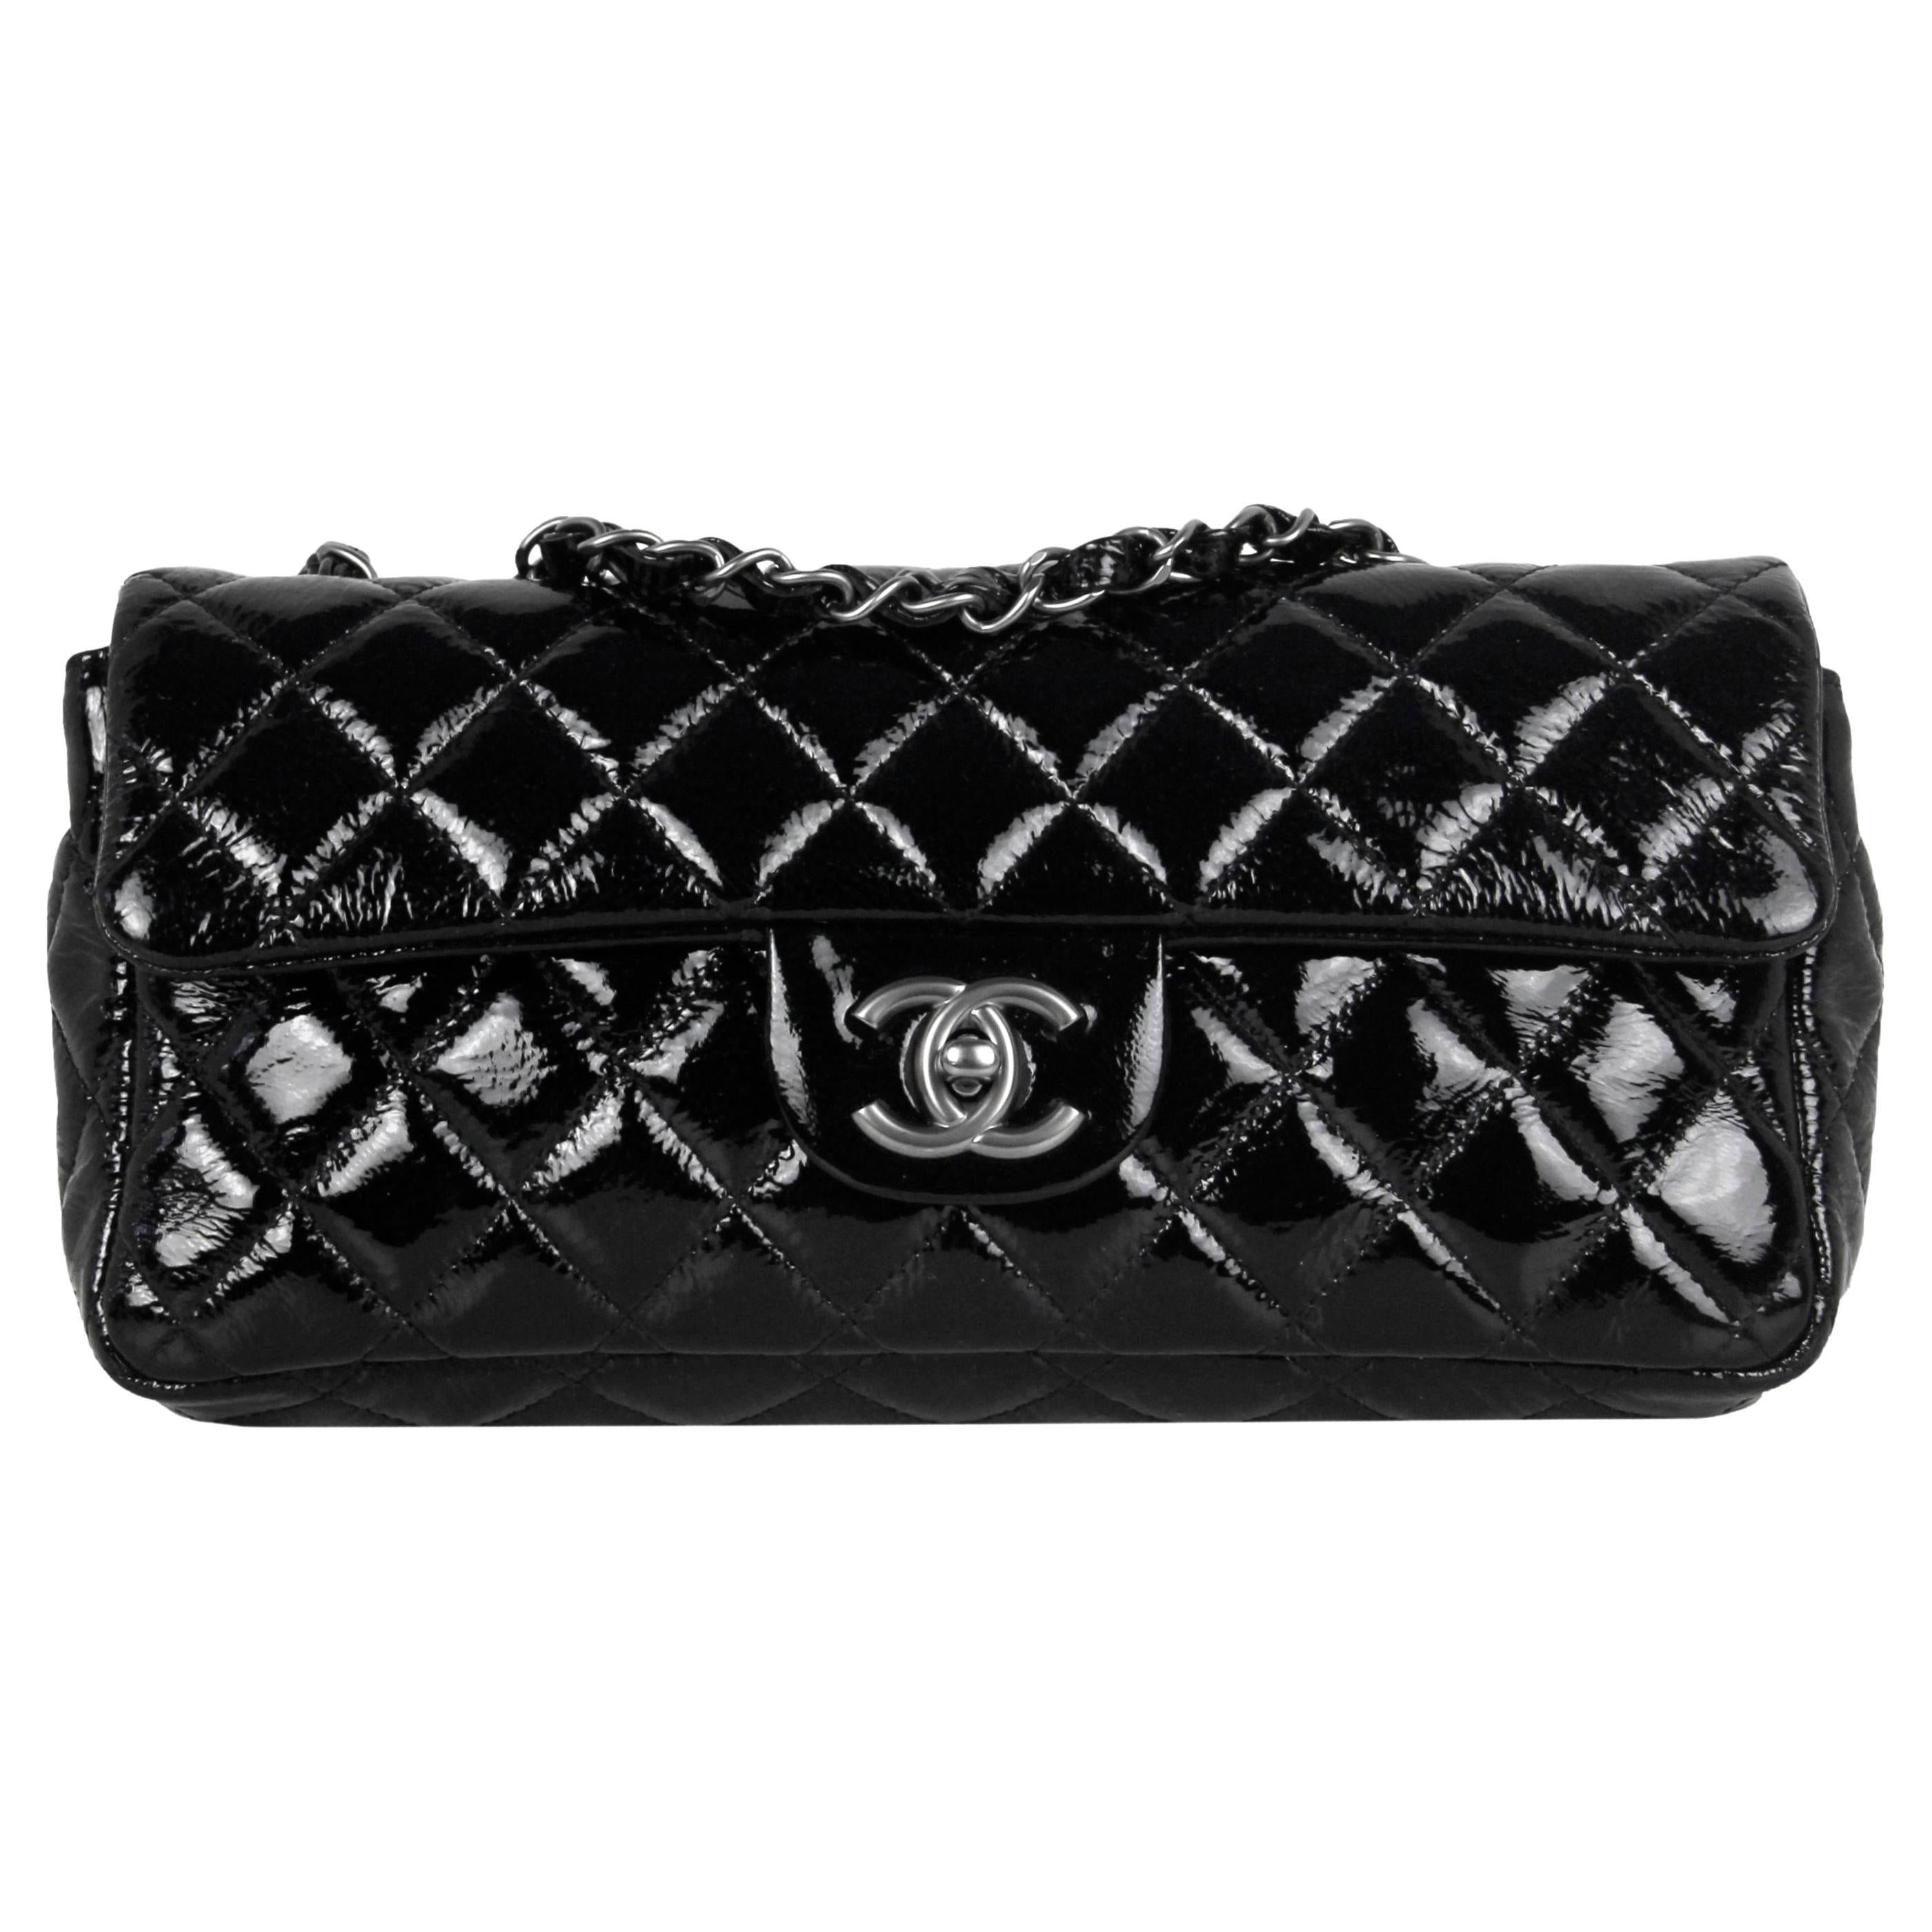 Chanel Black Distressed Patent Quilted East West Flap Bag